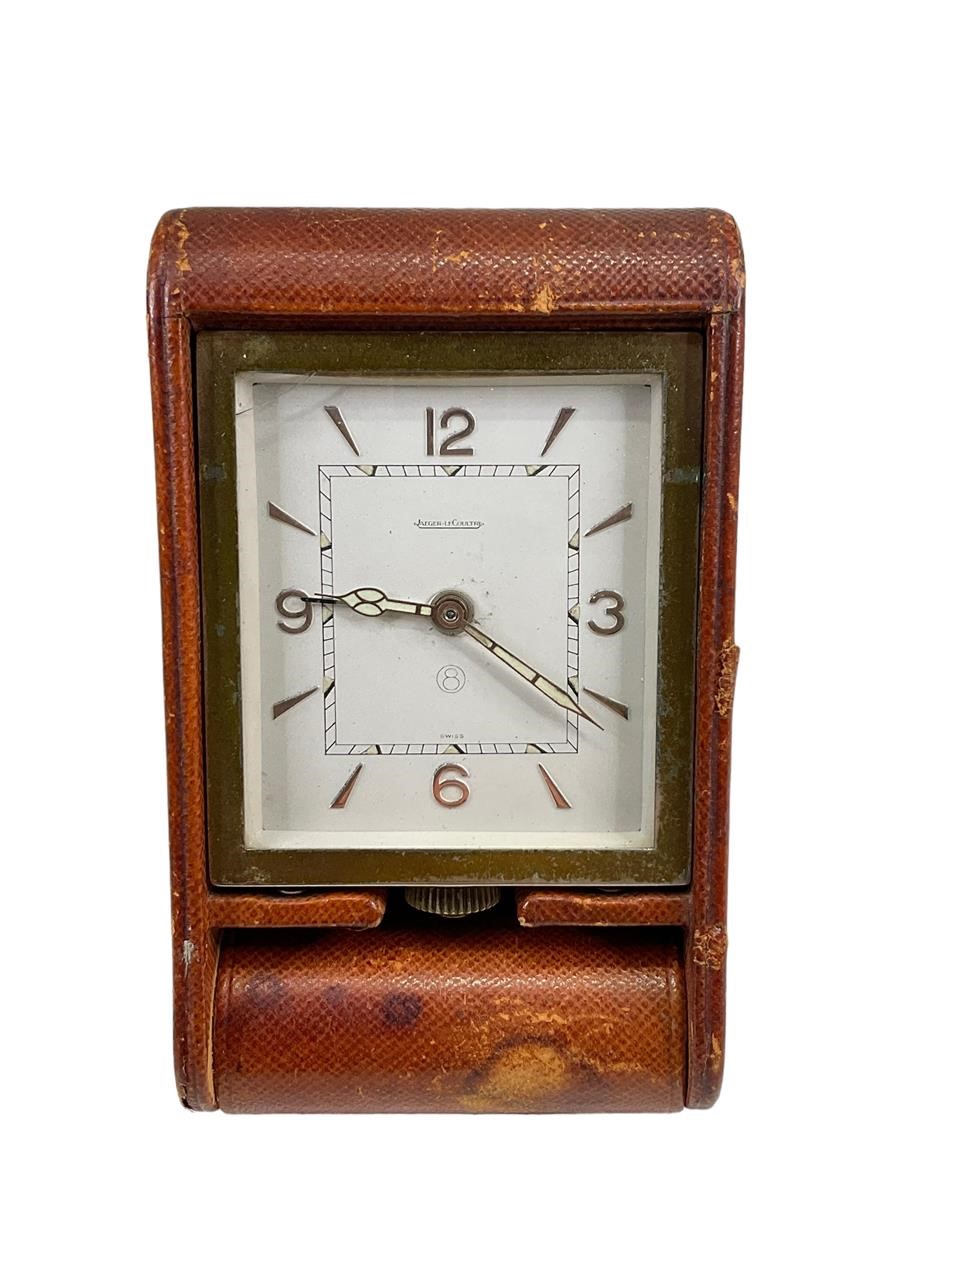 Jaeger LeCoultre Leather Cased Travel Clock